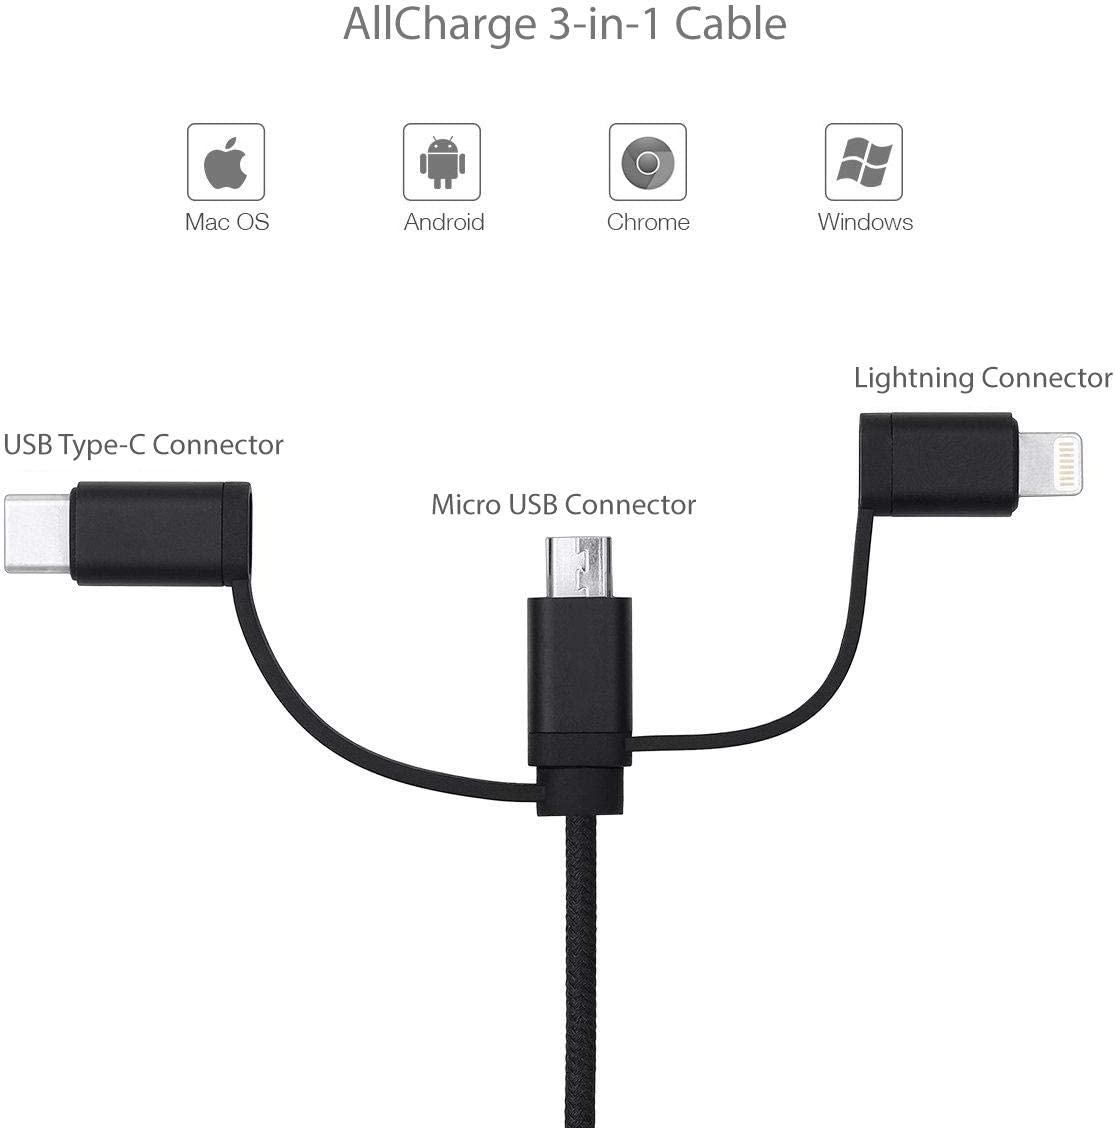 BoxWave Cable Compatible with JVC HA-A3T (Cable by BoxWave) - AllCharge 3-in-1 Cable for JVC HA-A3T - Jet Black